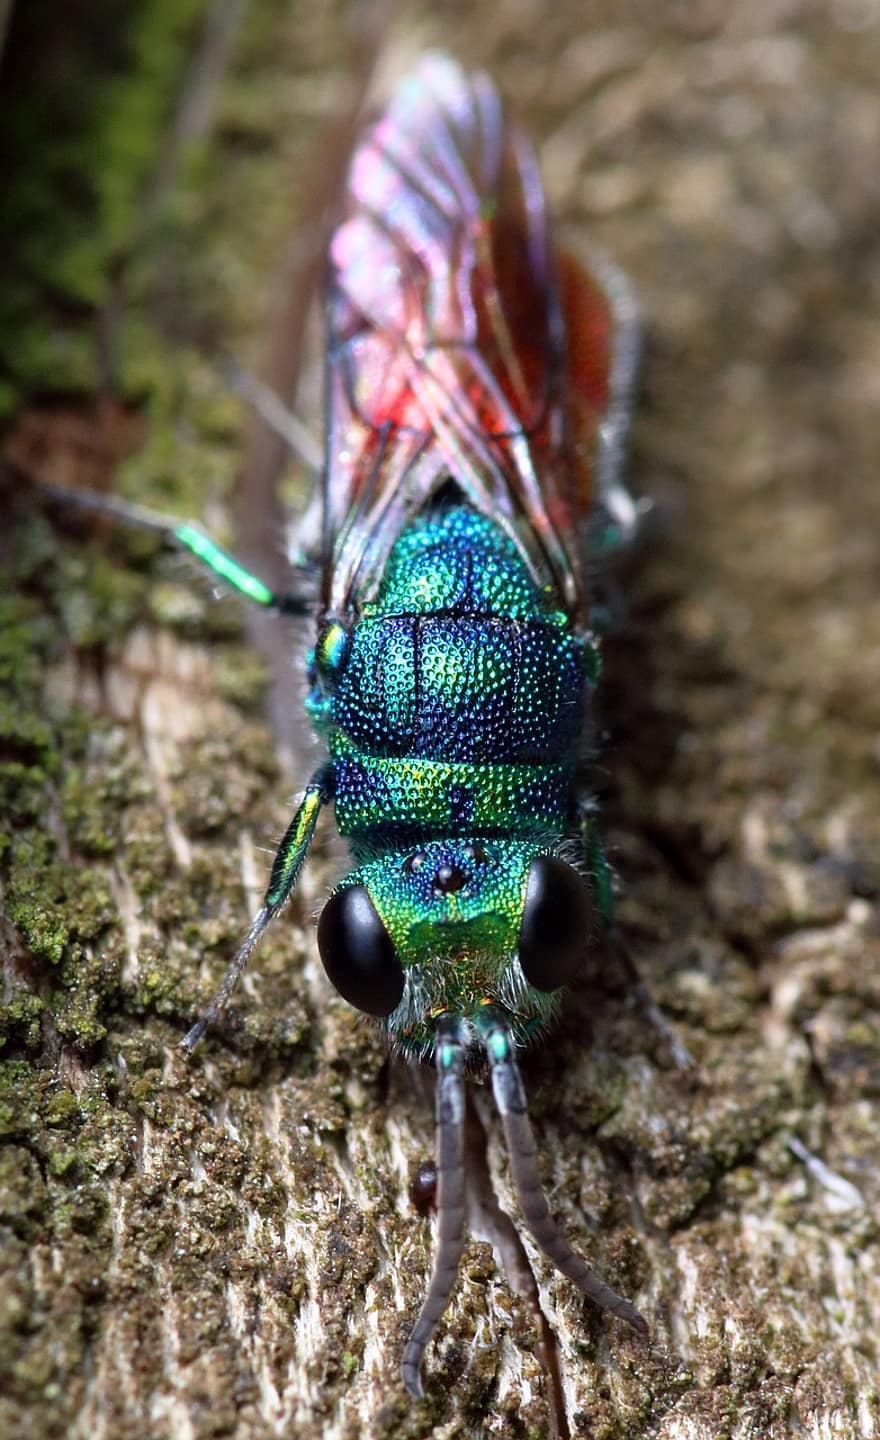 Ruby Tailed Wasp, Cuckoo Wasp, Metallic, Insect, Colourful, Iridescent, Nature